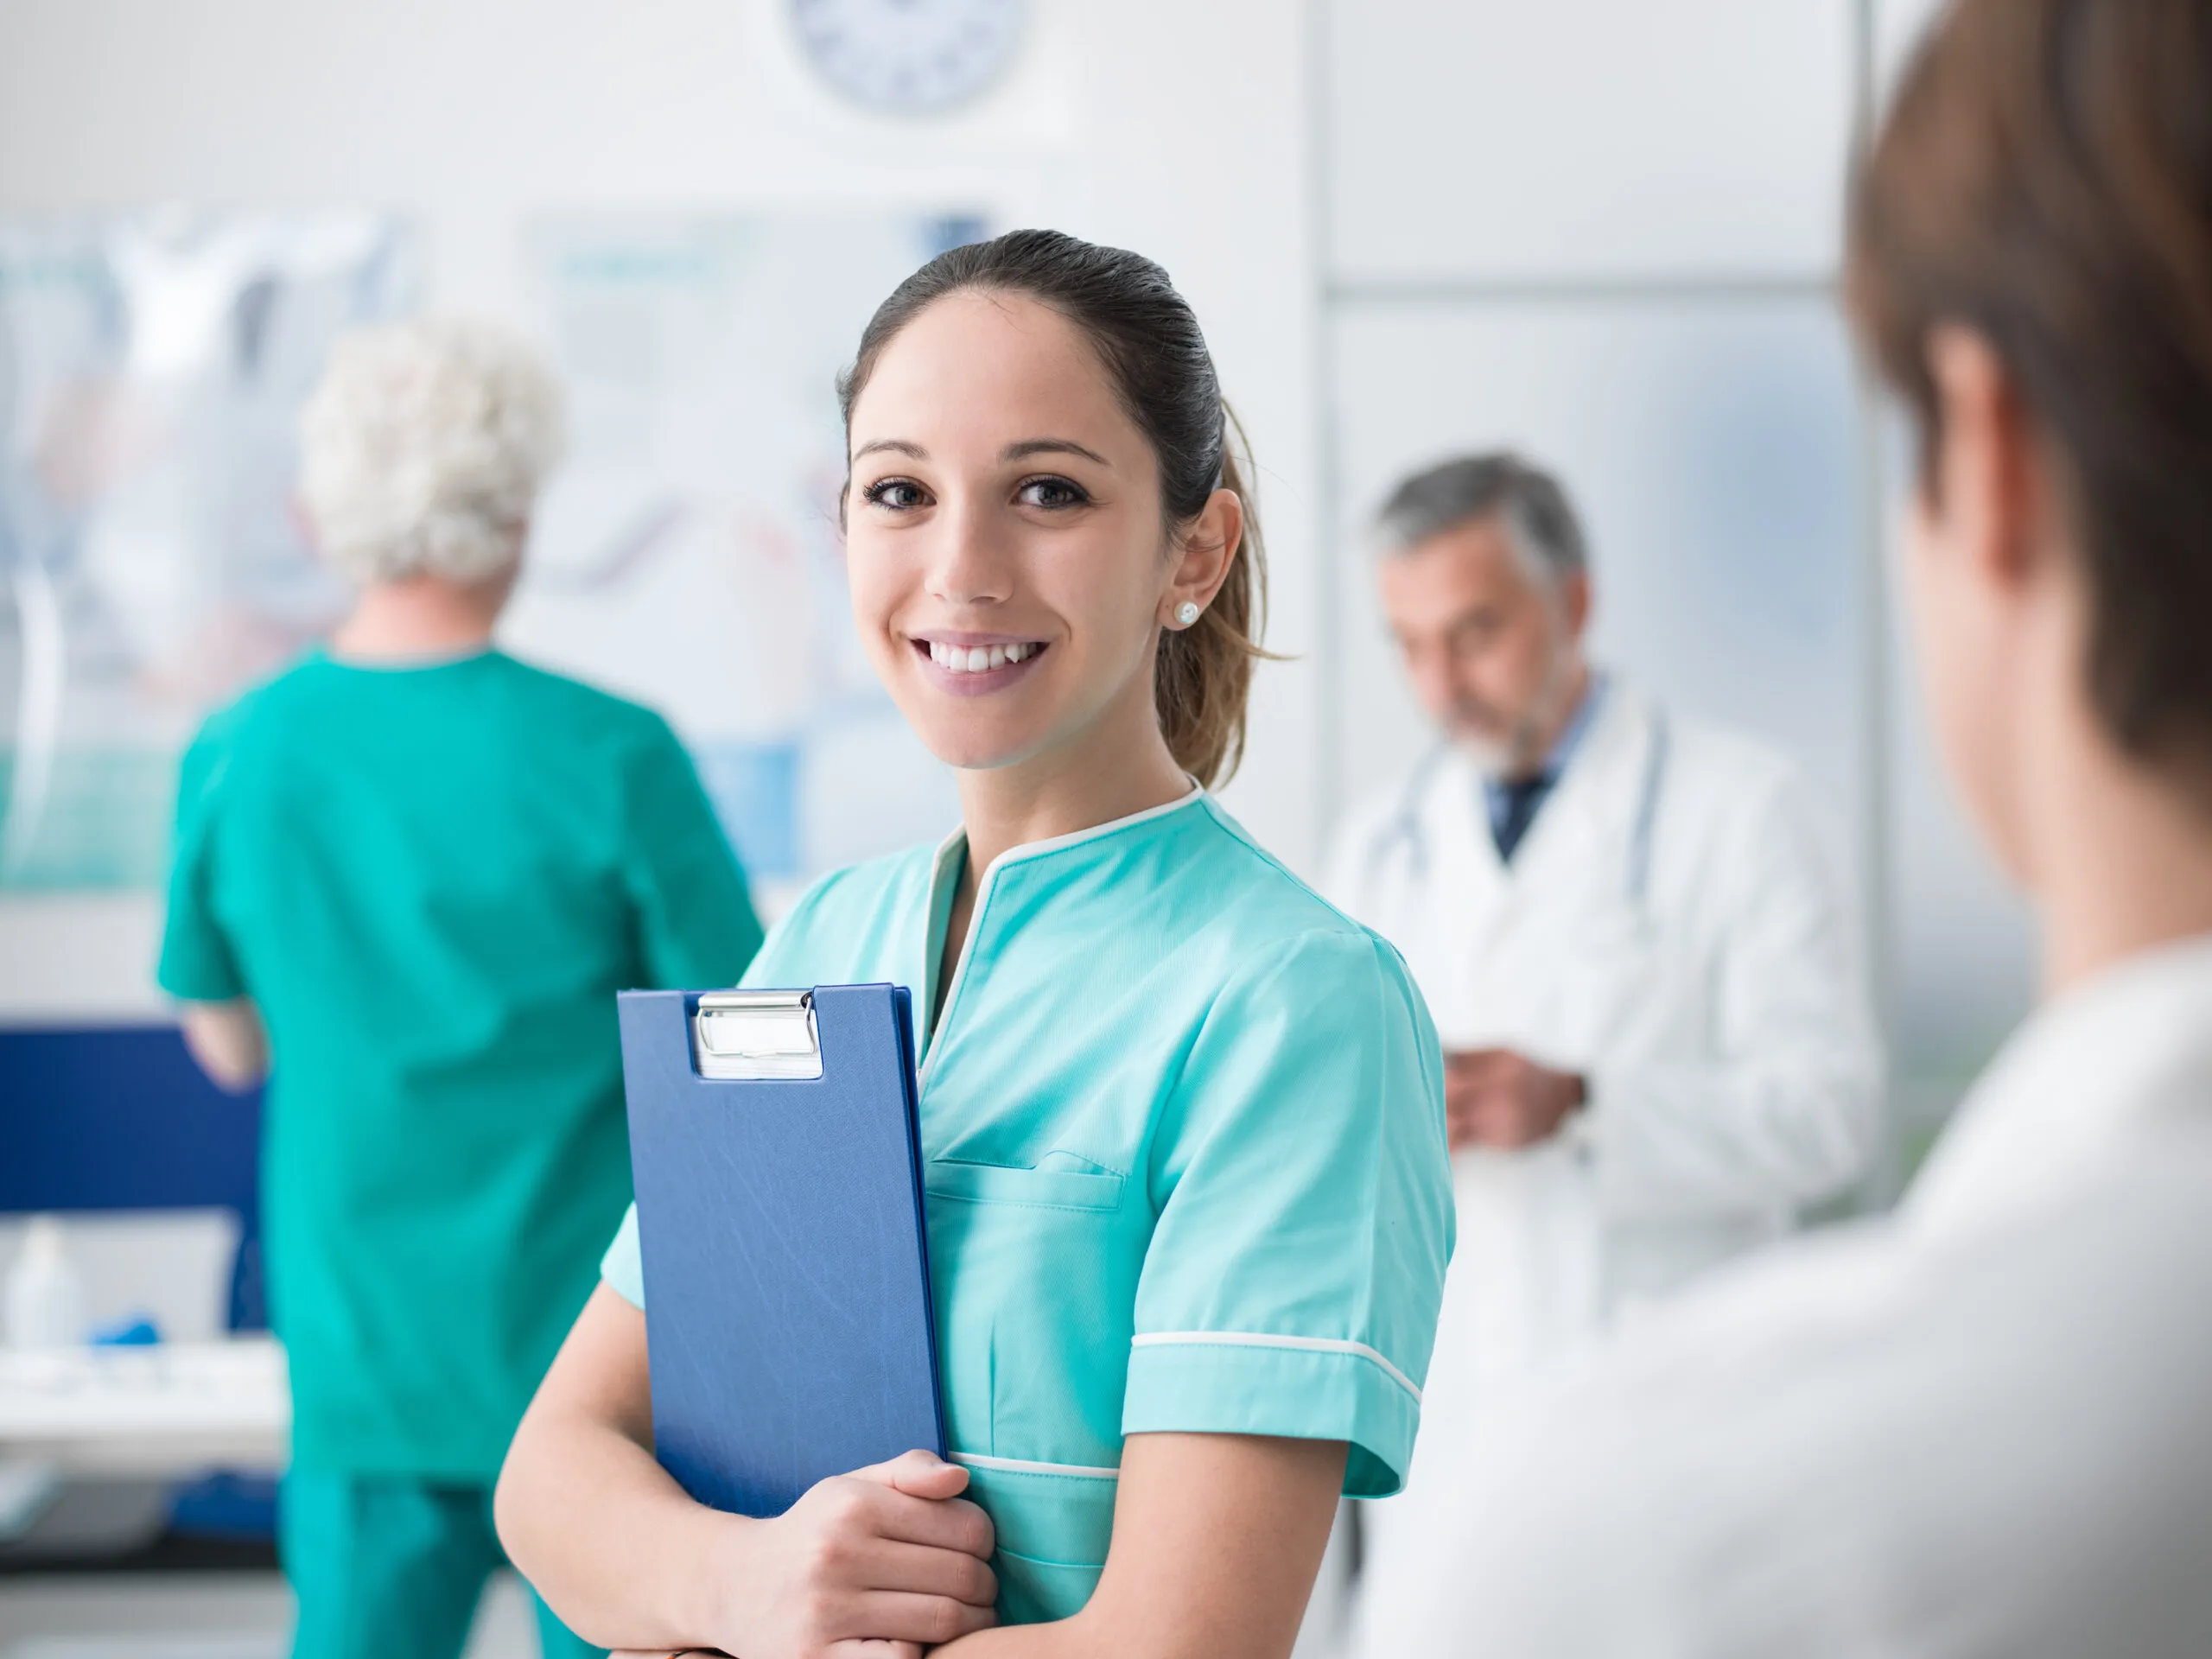 5 Medical Assistant Jobs to Consider for a Fulfilling Career